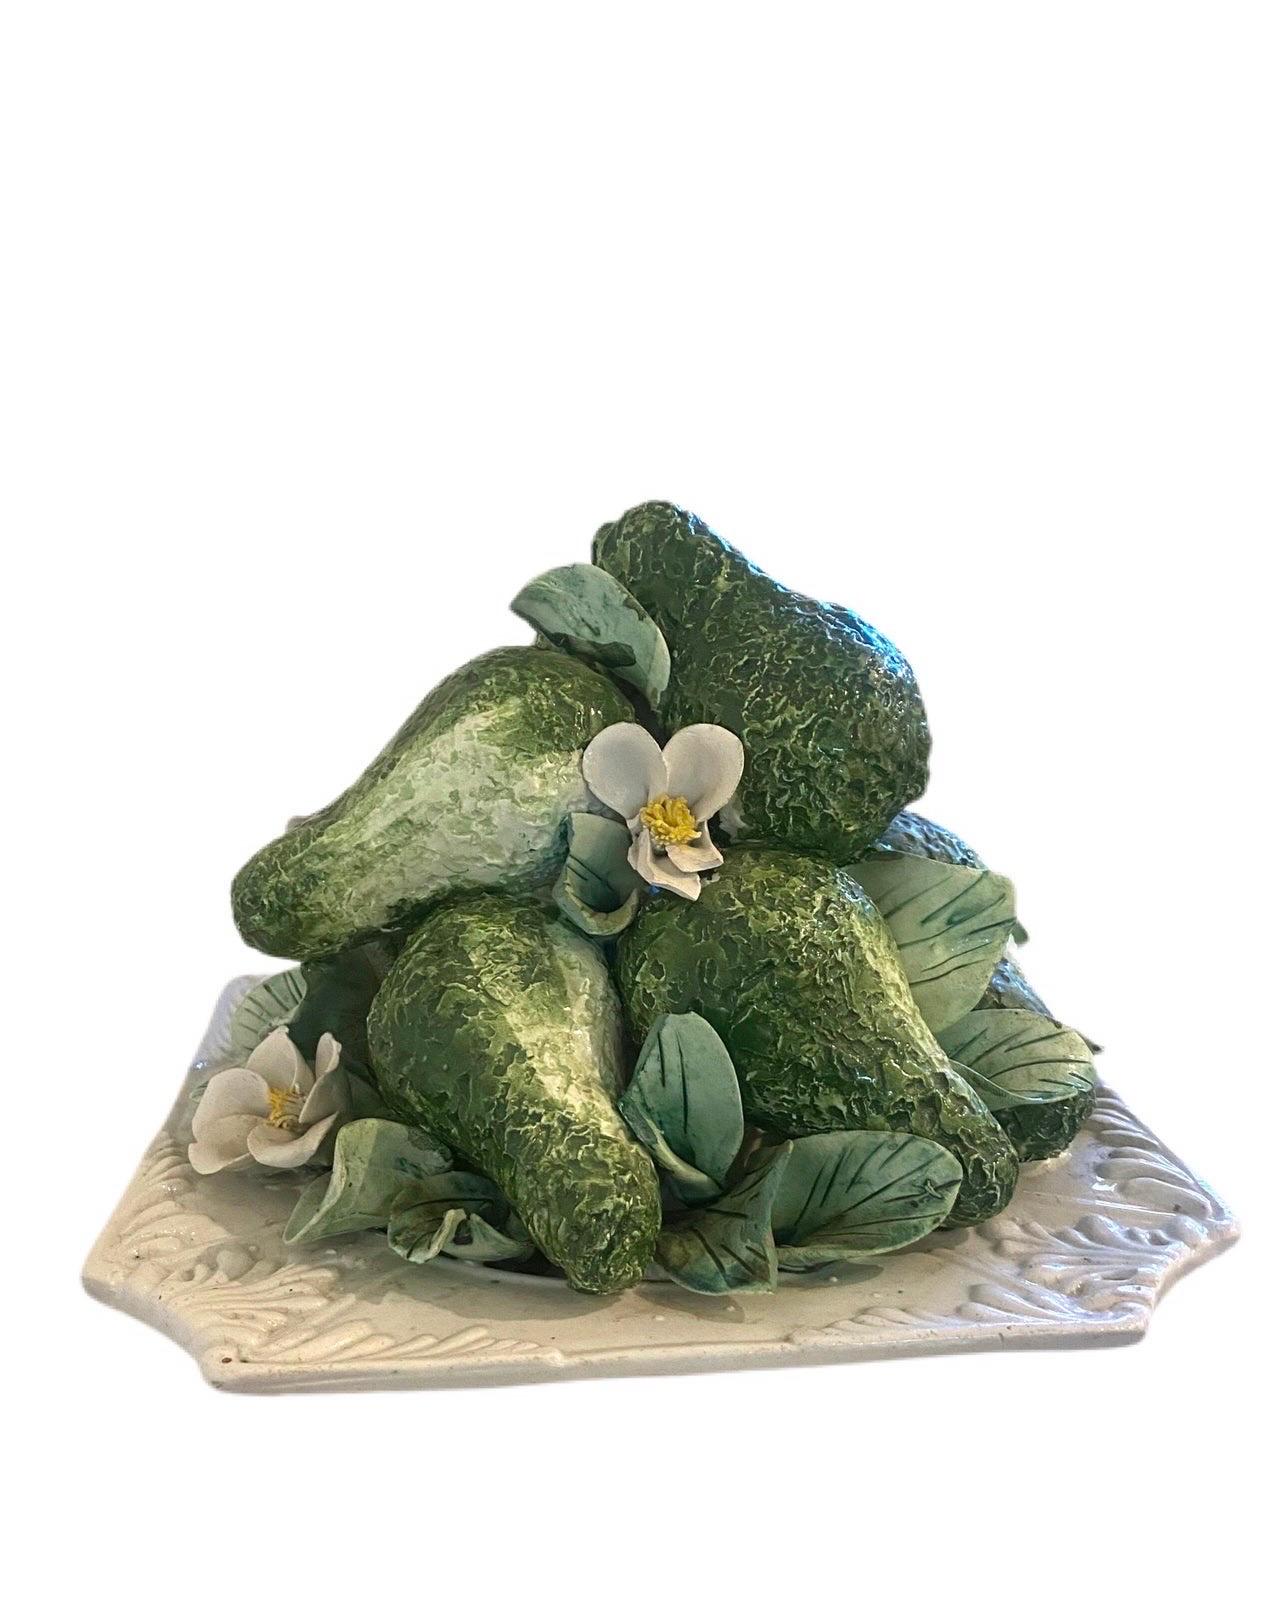 Wonderfully handcrafted greens with delicate white flowers where avocados sit piled on top of one another.